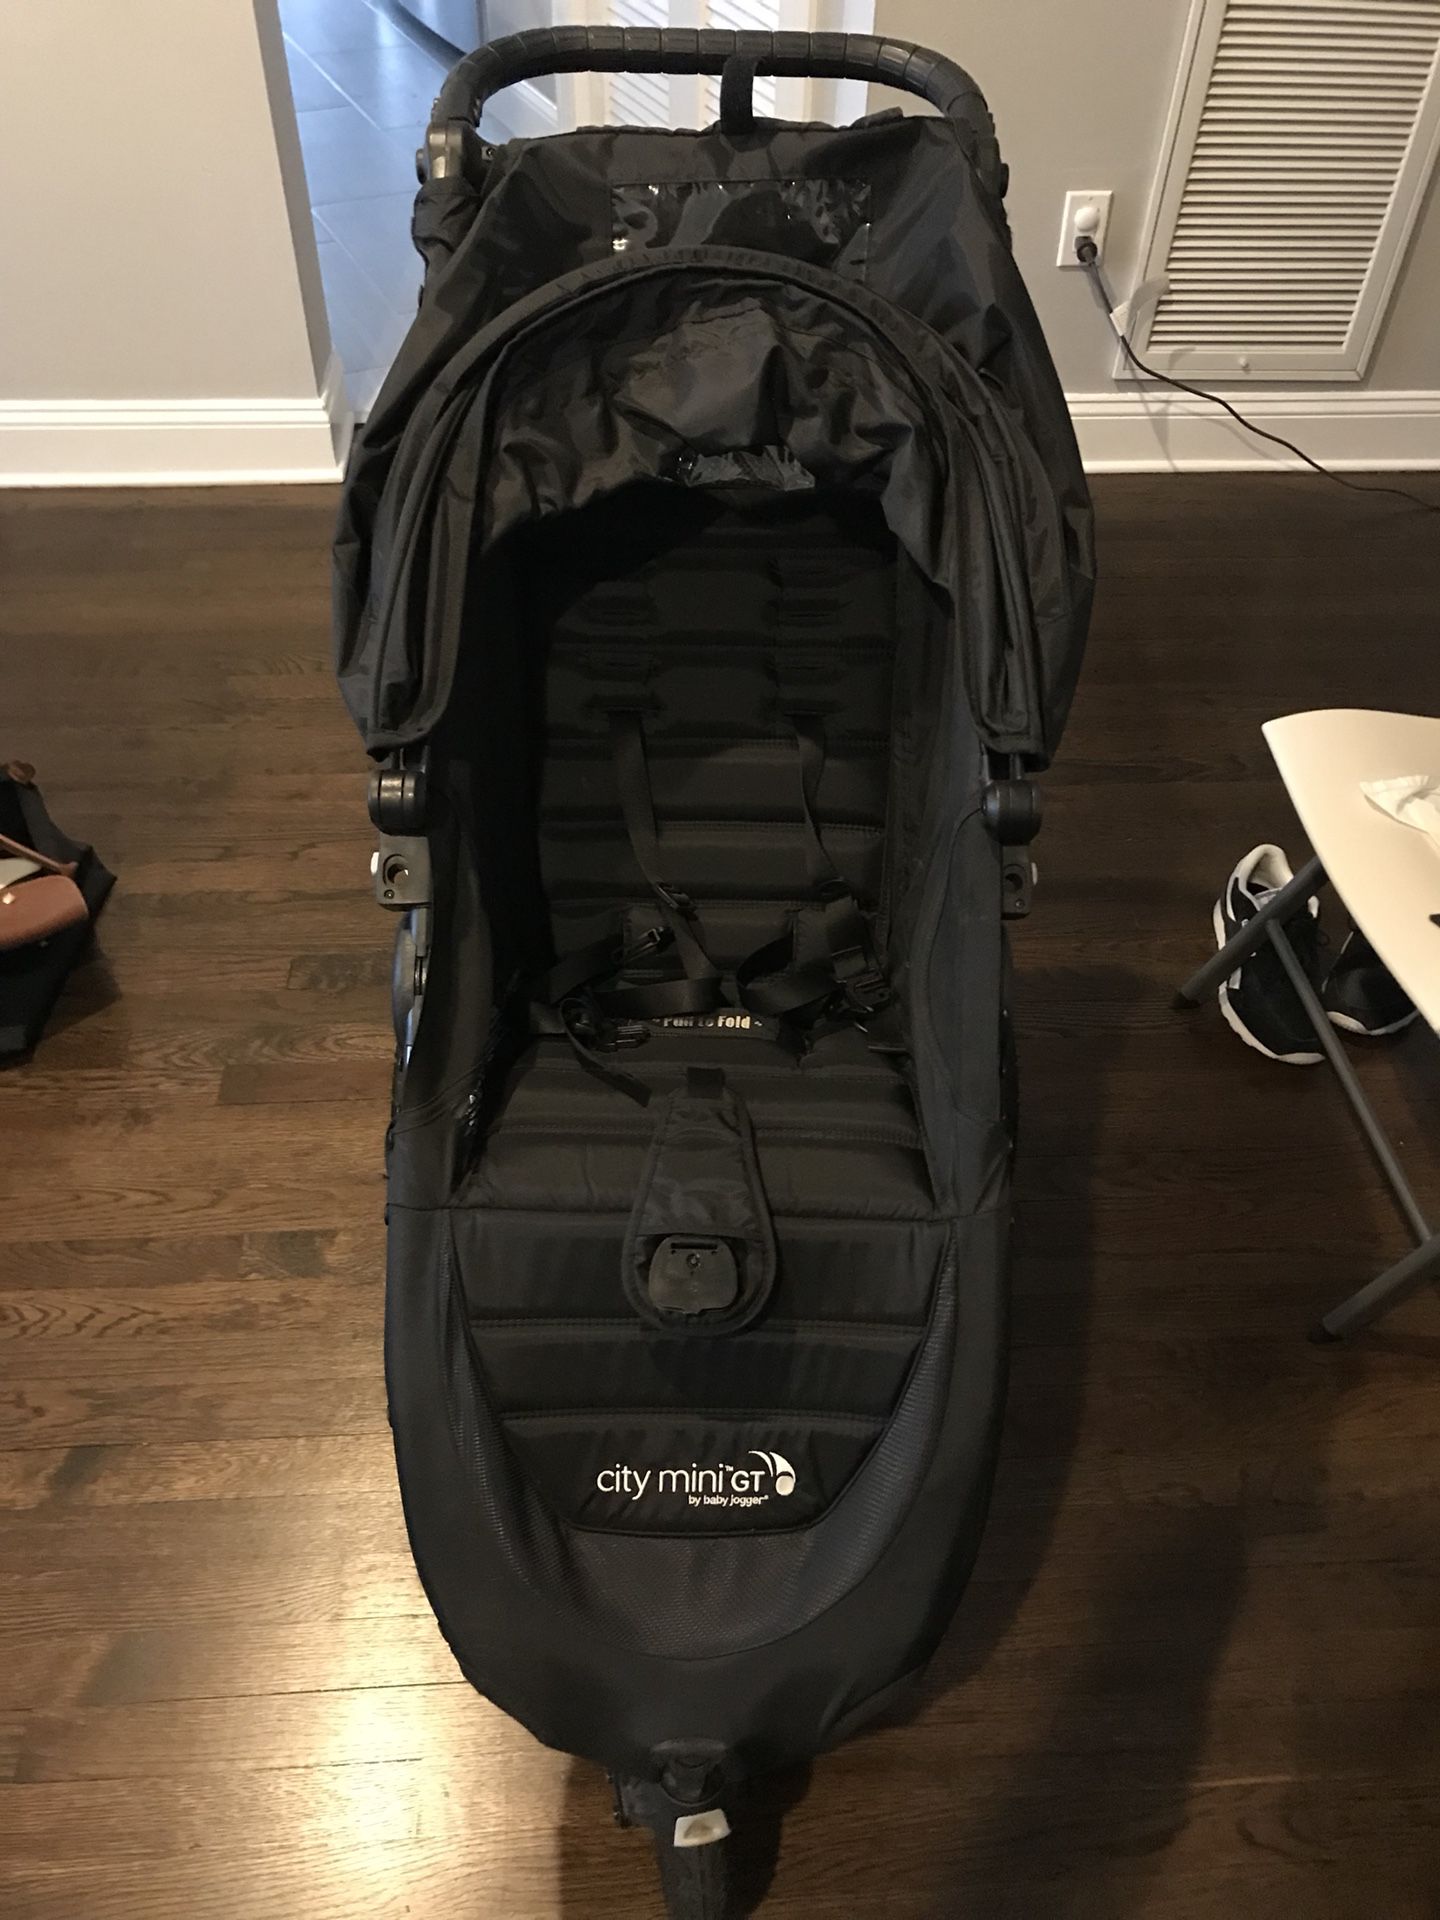 City Mini GT by Baby Jogger stroller